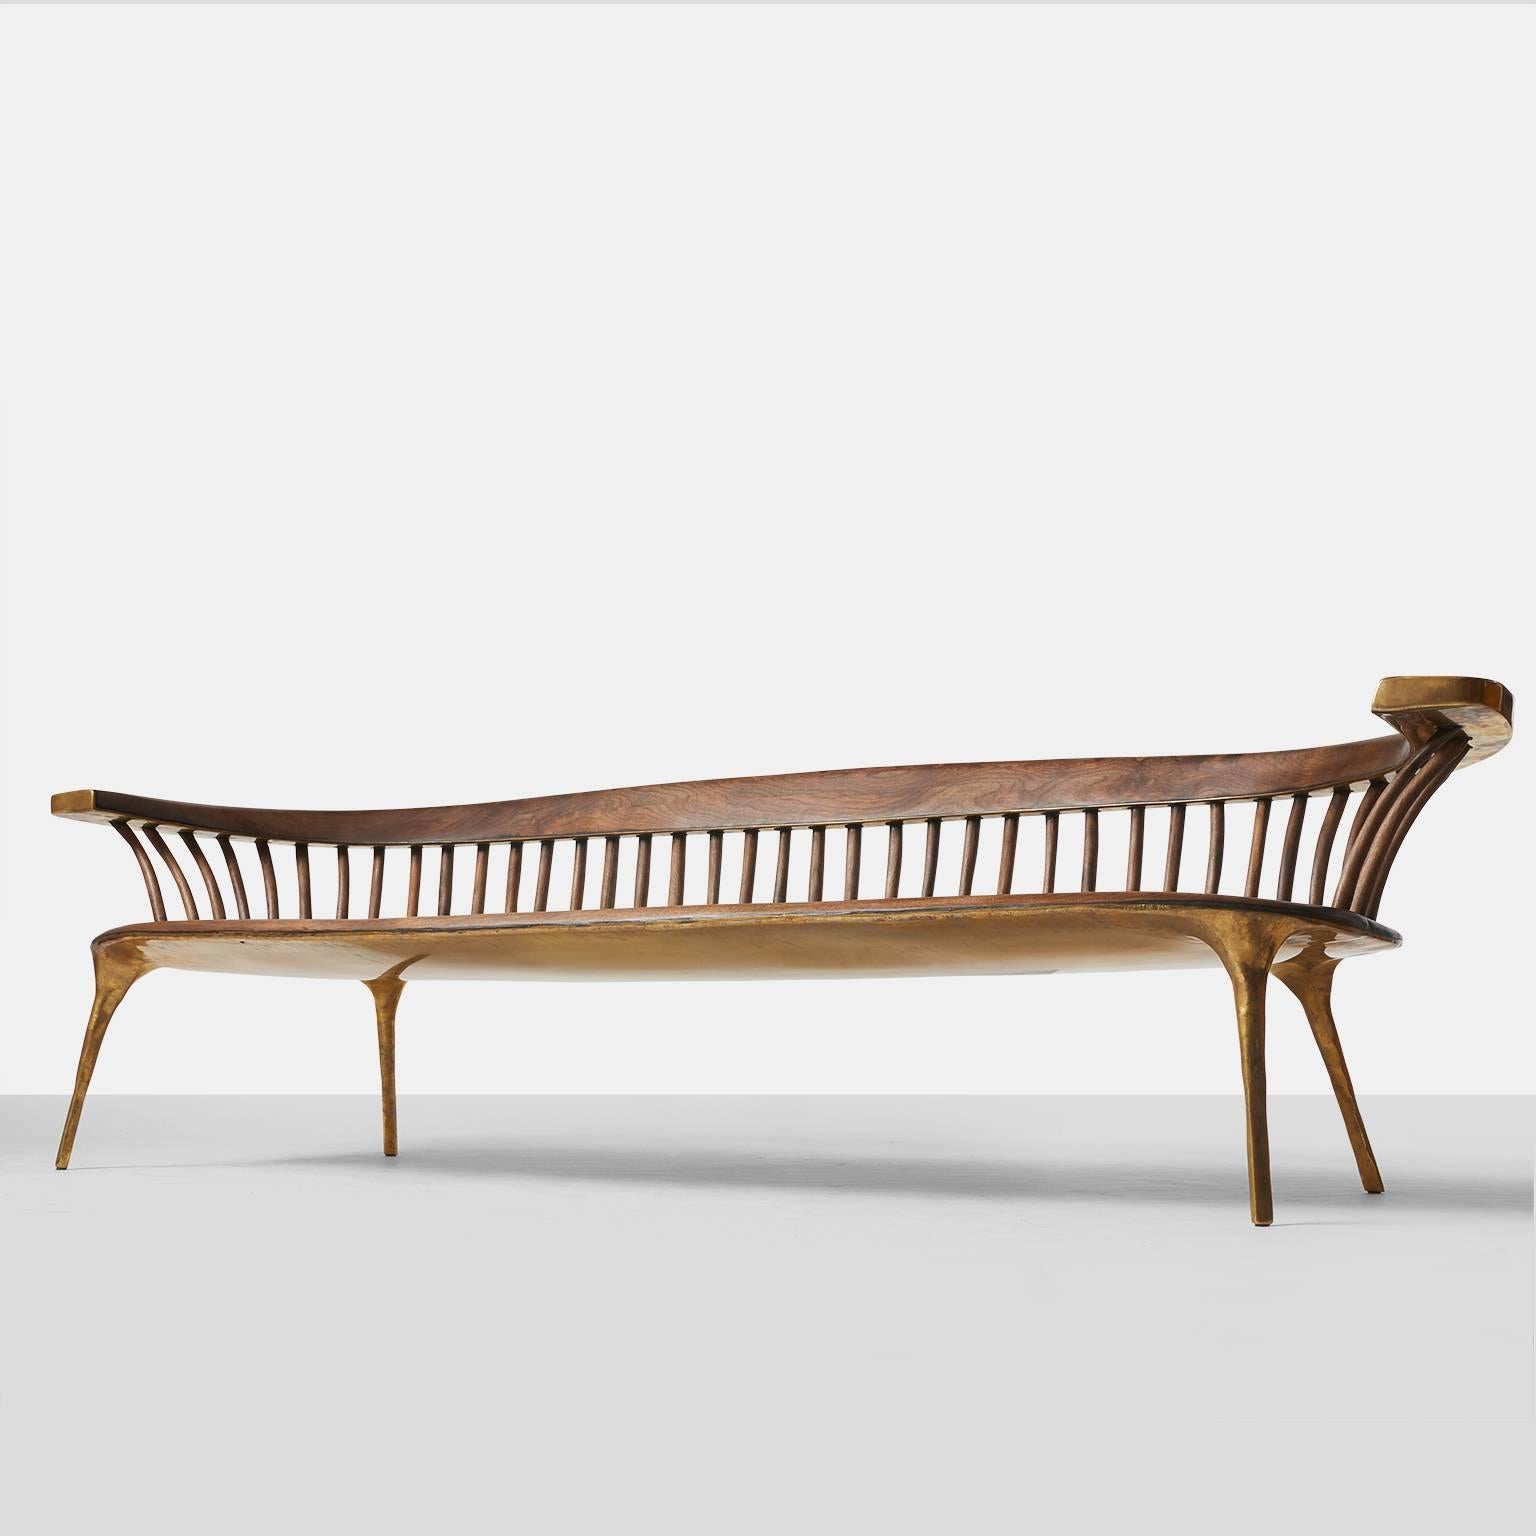 A completely handmade sculptural sofa in solid brass with a walnut seat and back support. All brass work is hand-forged and wood work is hand planed. Valentin Loellmann was an award winner at PAD London for Best Contemporary Design piece.